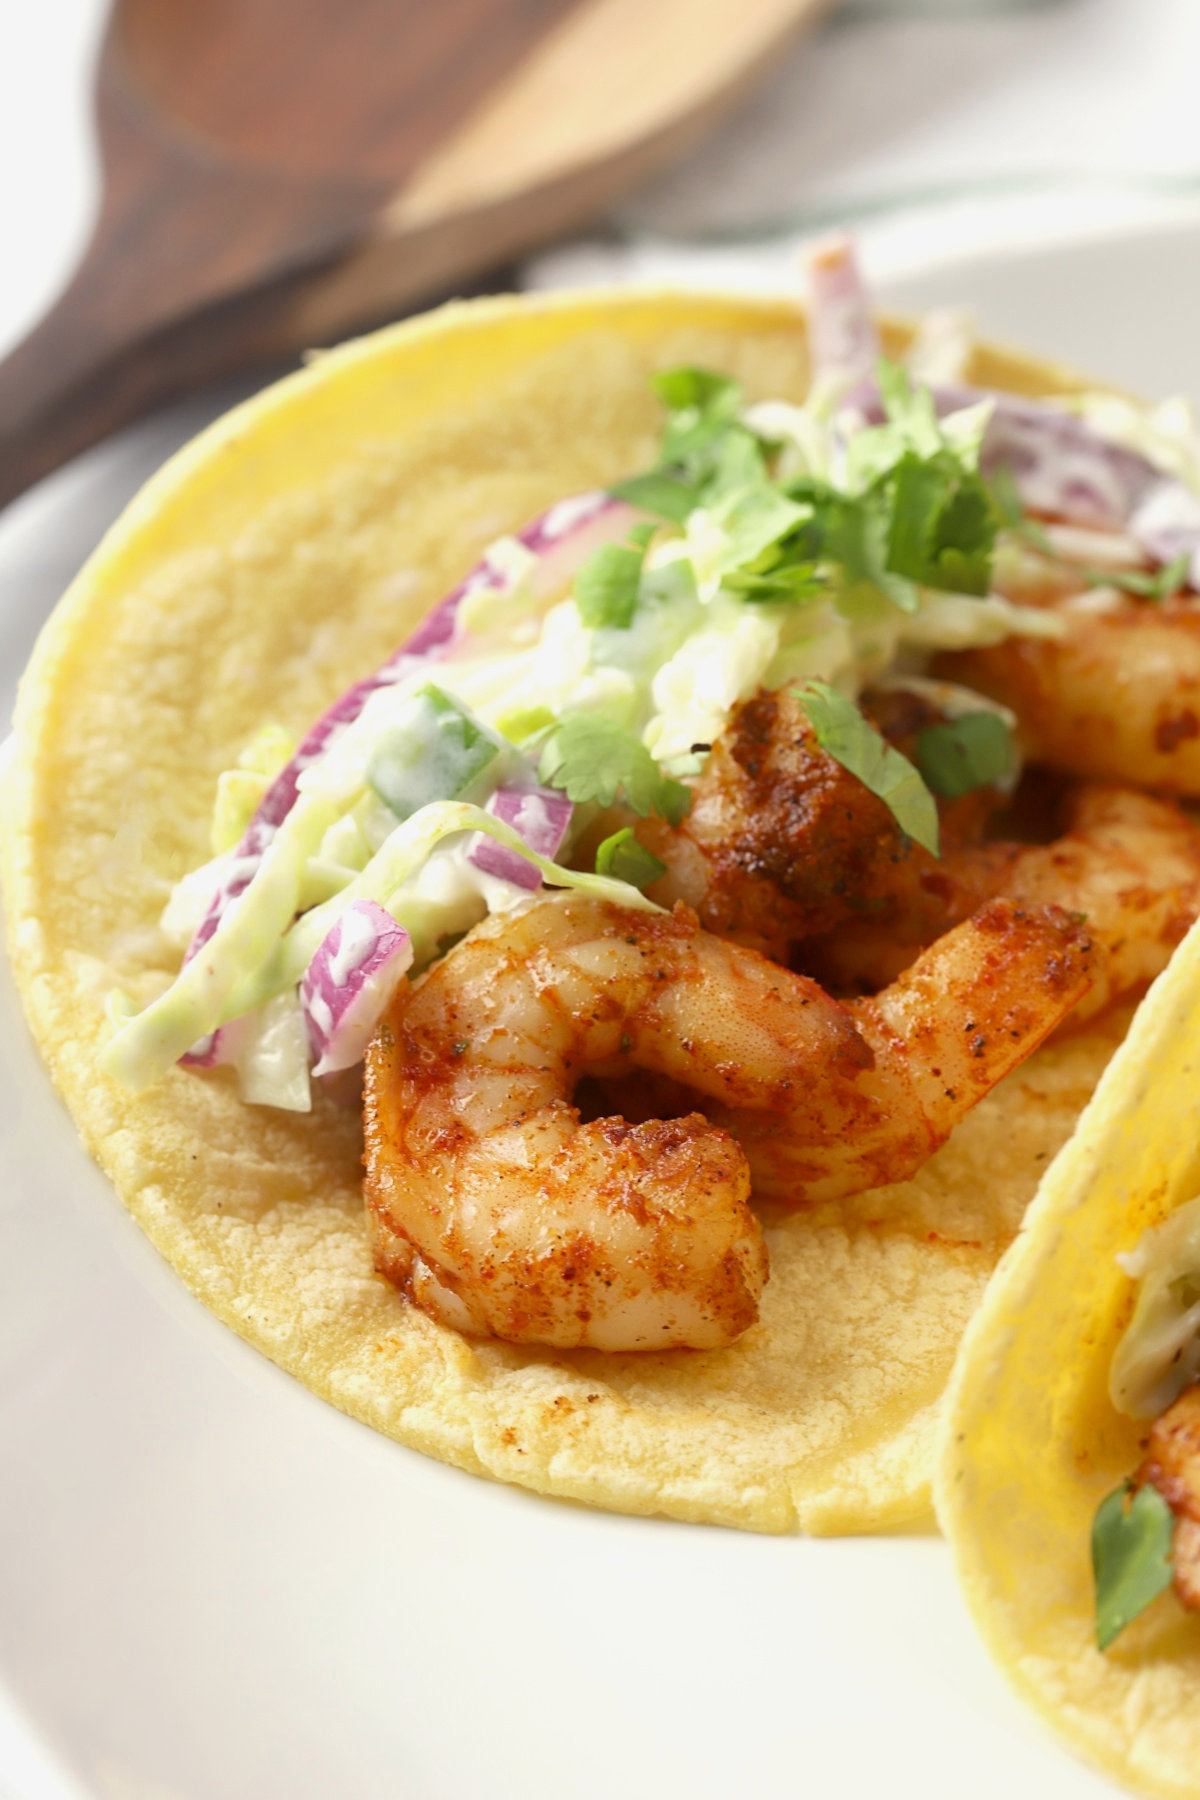 Shrimp in a corn tortilla, topped with cole slaw.